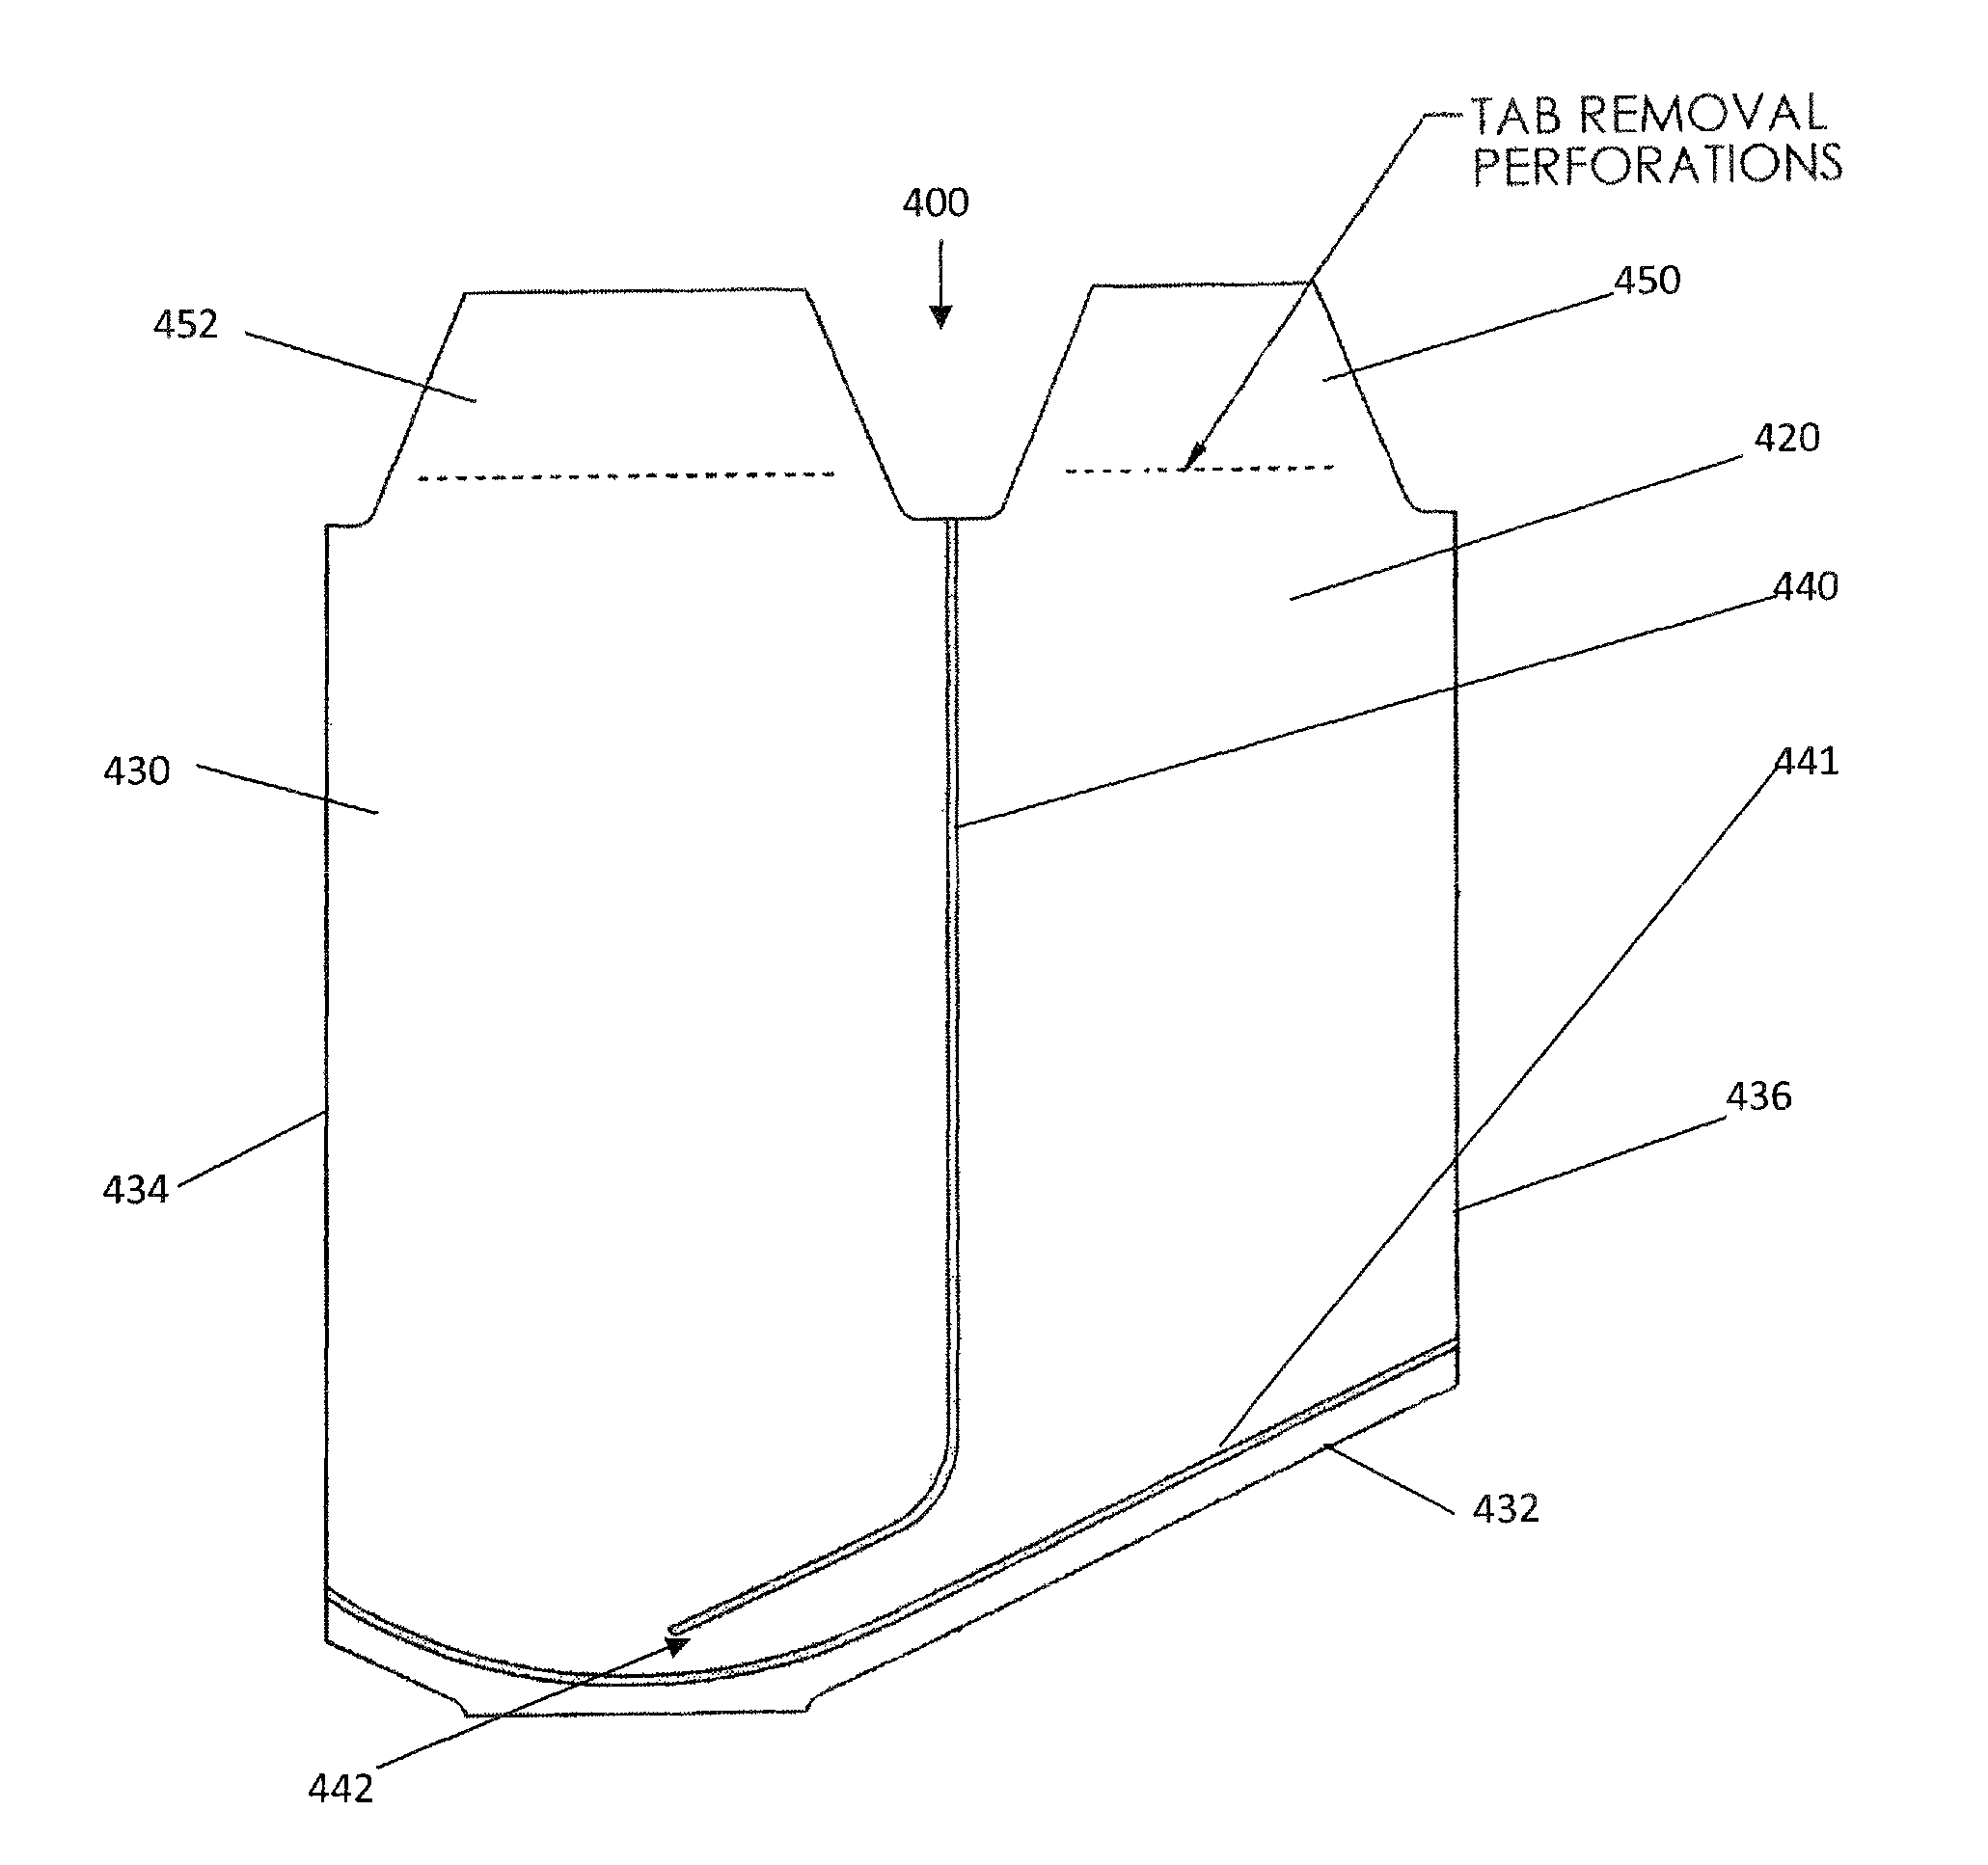 Apparatus and composition for inhibiting dental caries